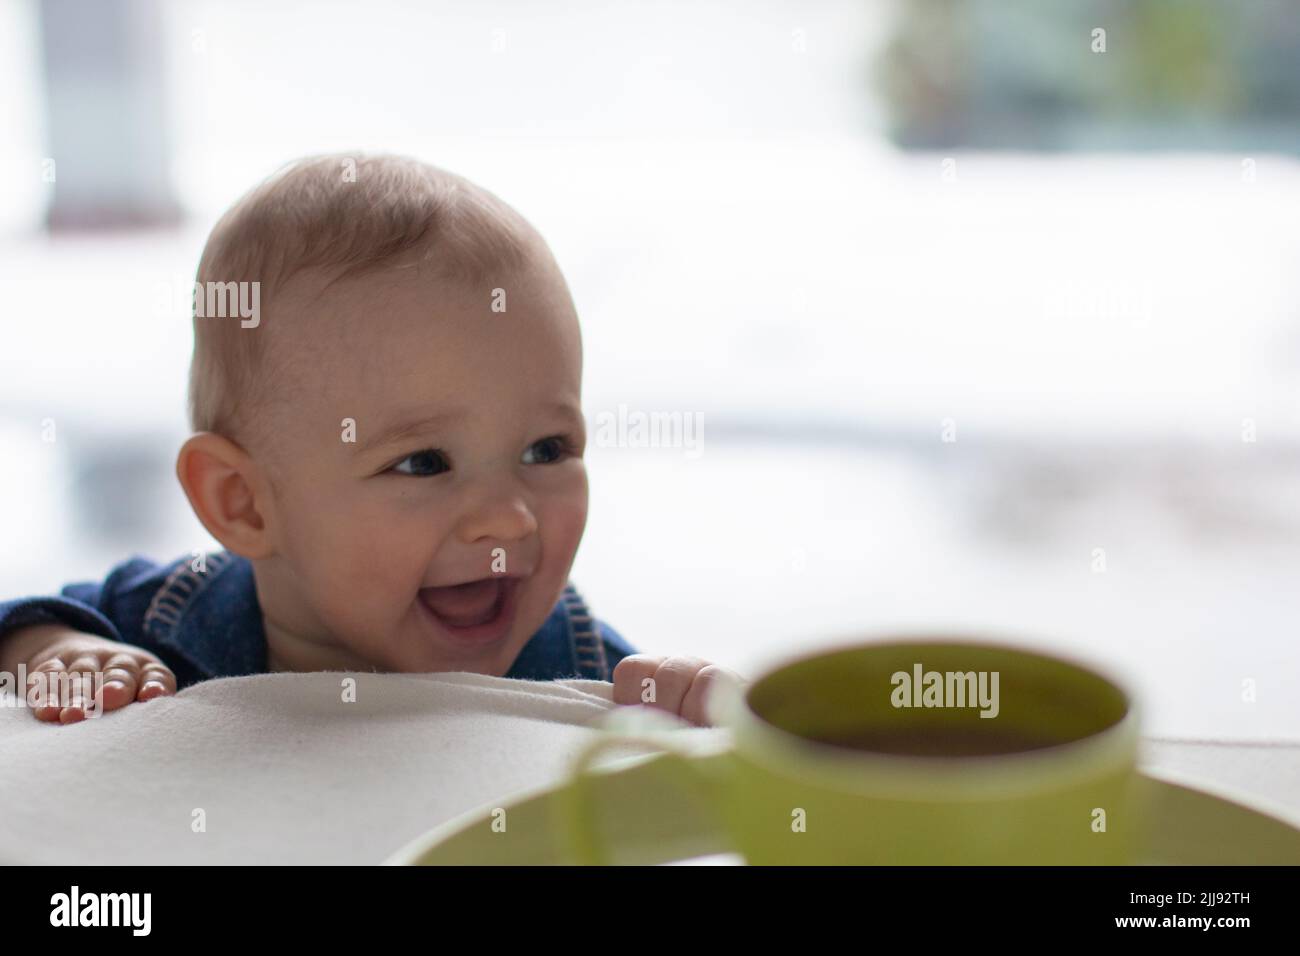 Laughing mischievous toddler with a cute naughty expression, little blonde boy troublemaker, daily home life childhood scene Stock Photo